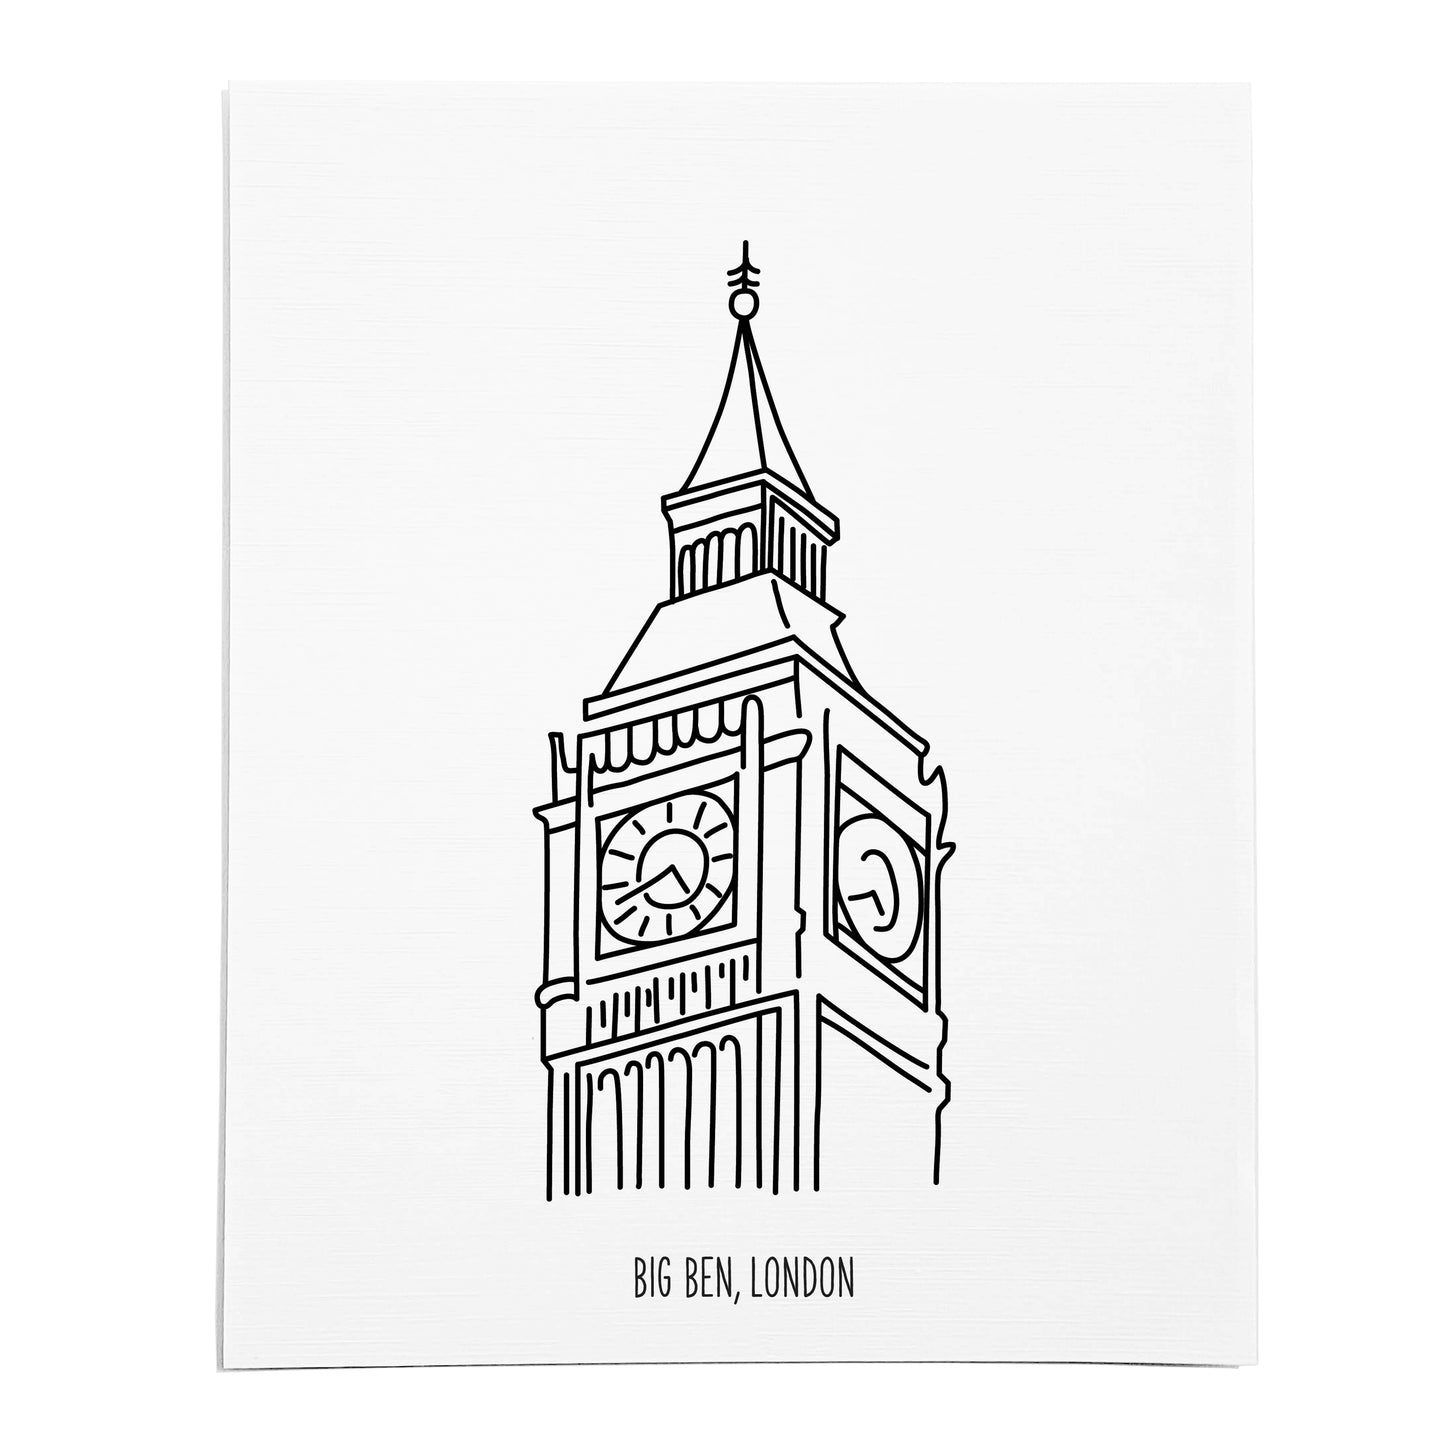 An art print featuring a line drawing of Big Ben on white linen paper